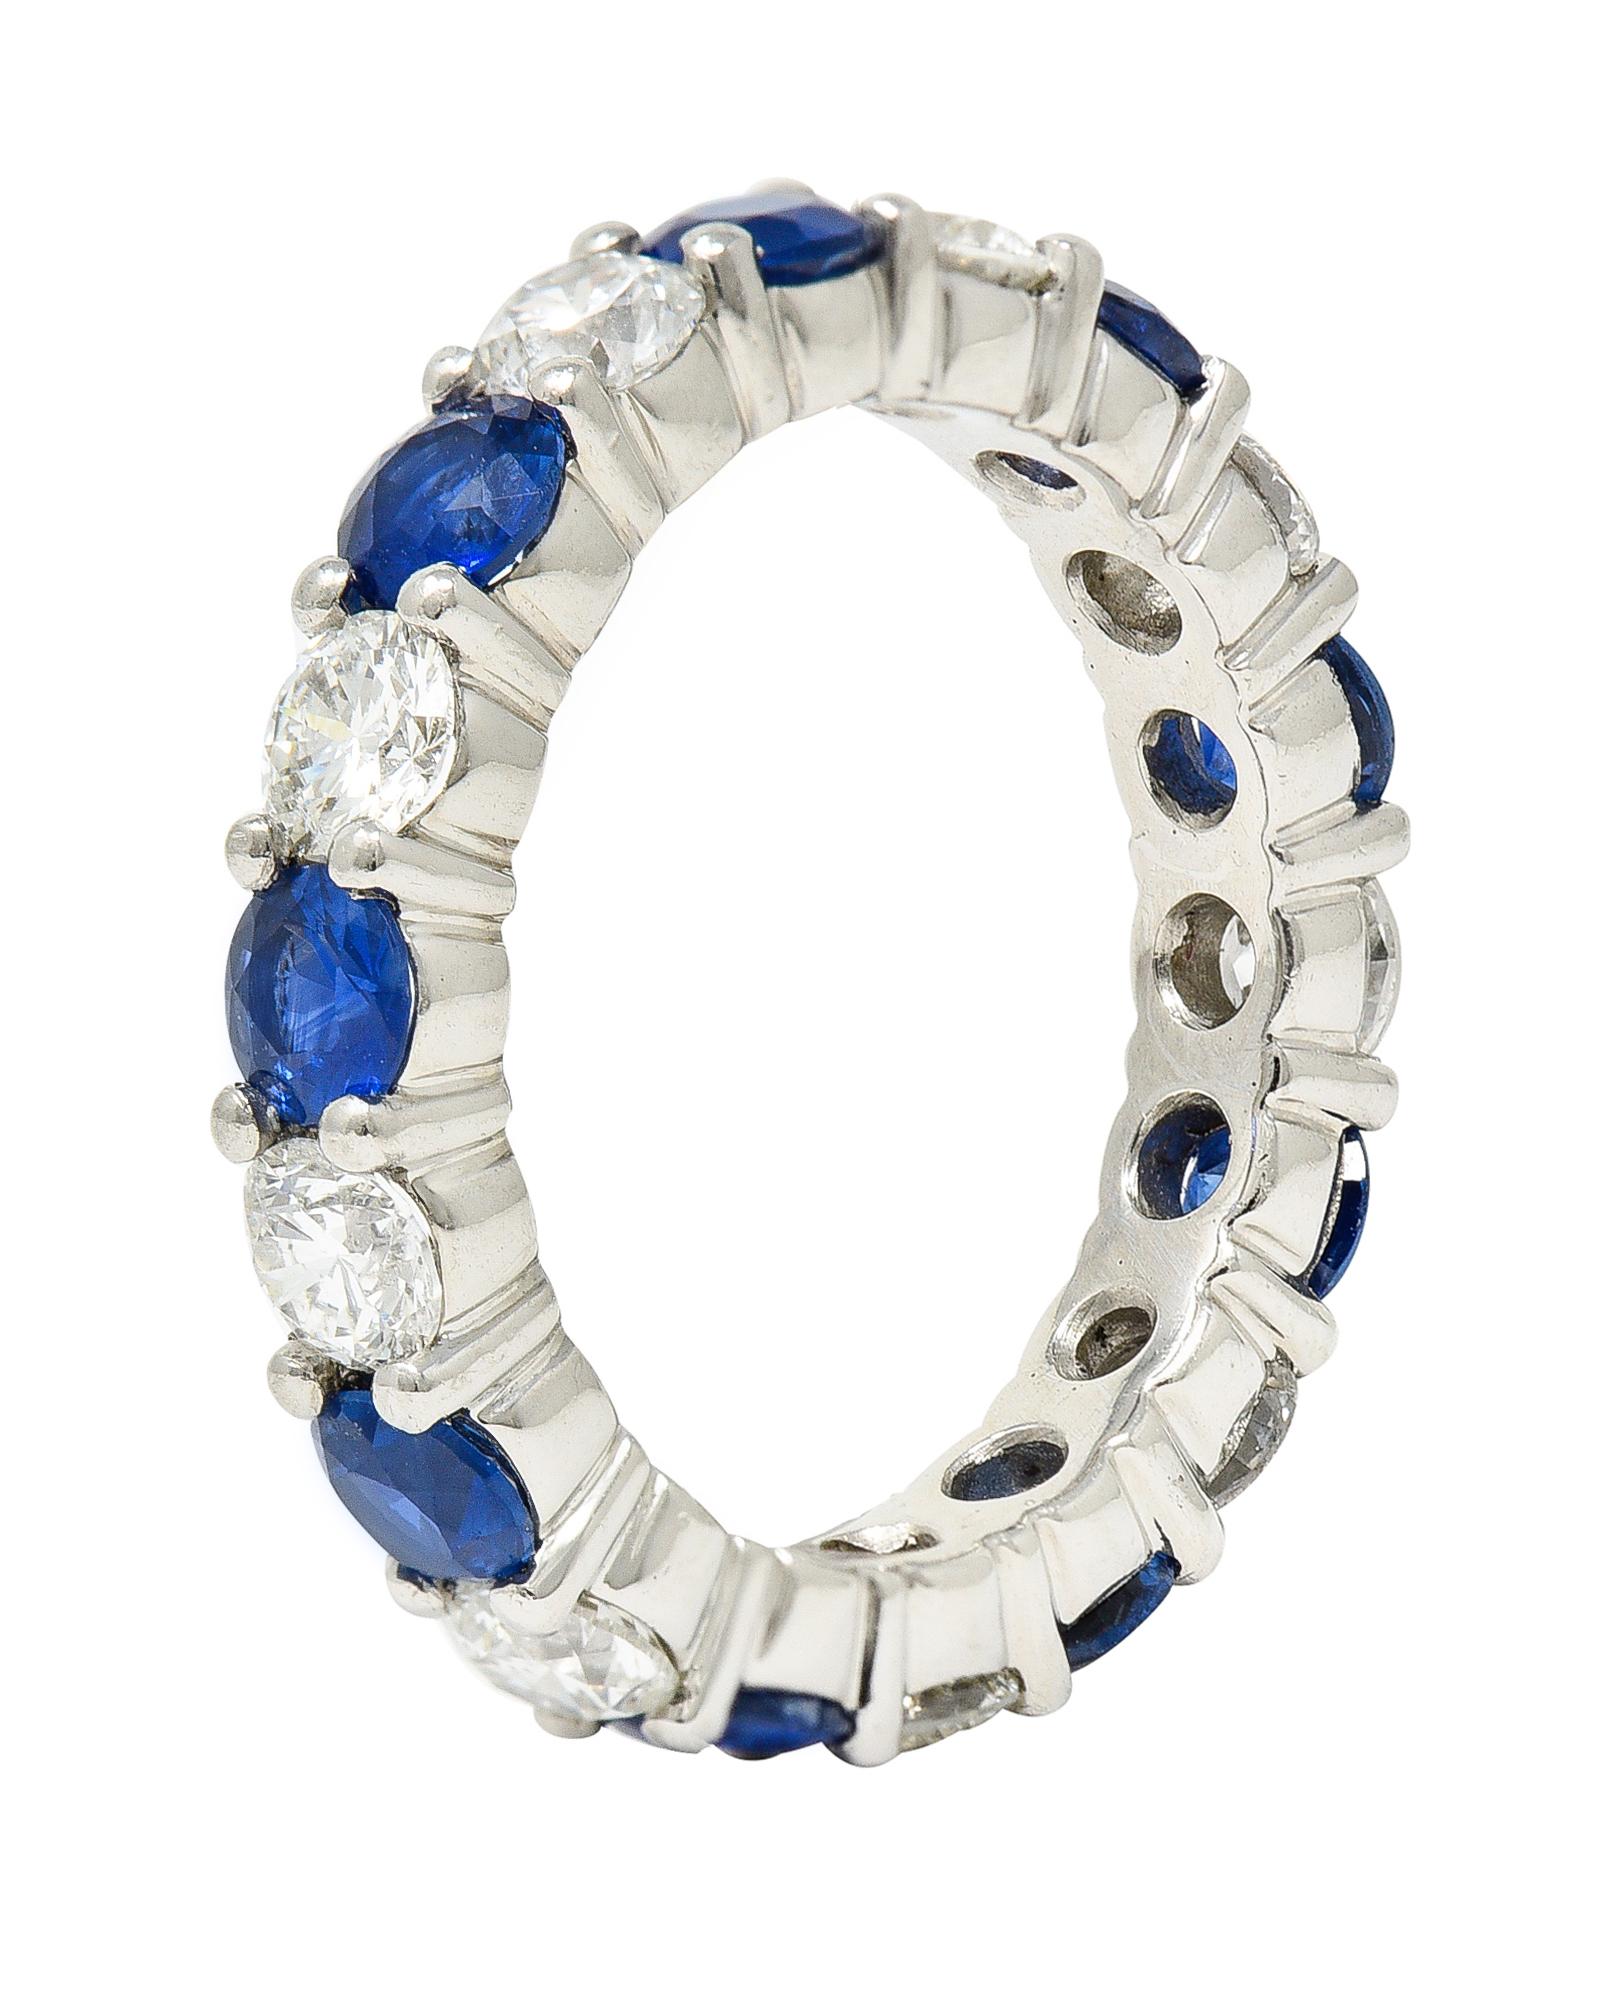 Eternity band ring features round brilliant cut diamonds alternating with round cut sapphires. Set via shared prong fully around. Total diamond weight is approximately 1.55 carat with I/J color and primarily SI1 clarity. Sapphires are well matched